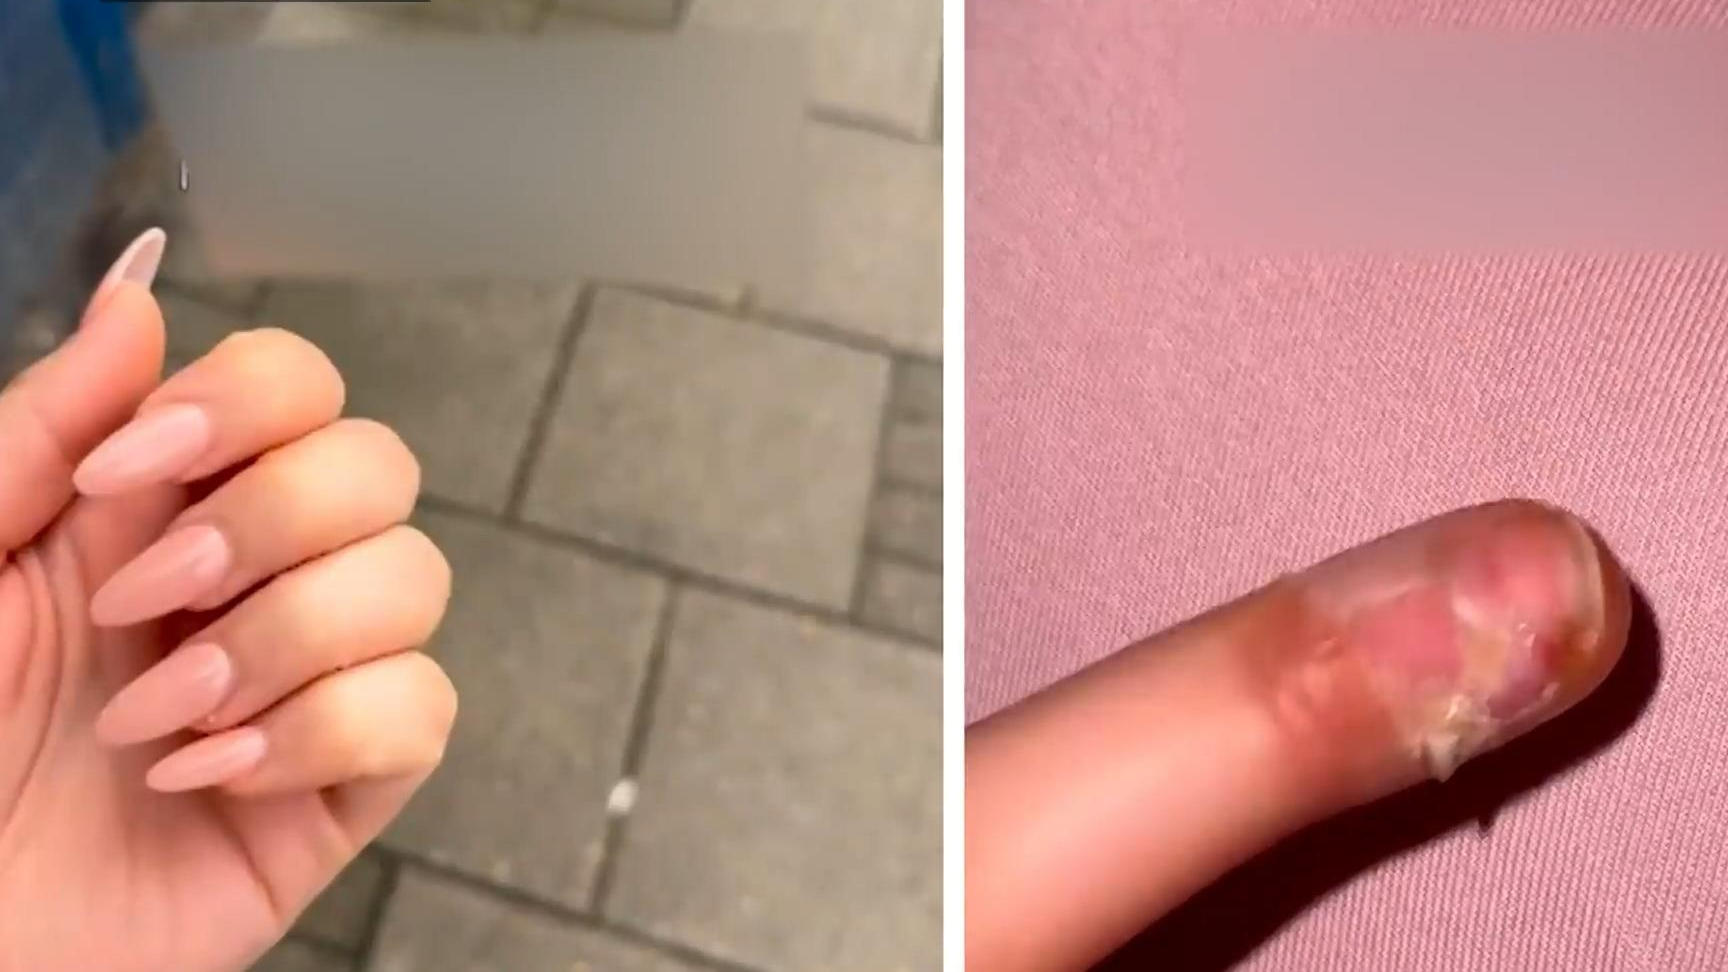 A 21-year-old woman almost lost her finger after a nail procedure, and doctors were considering amputating it